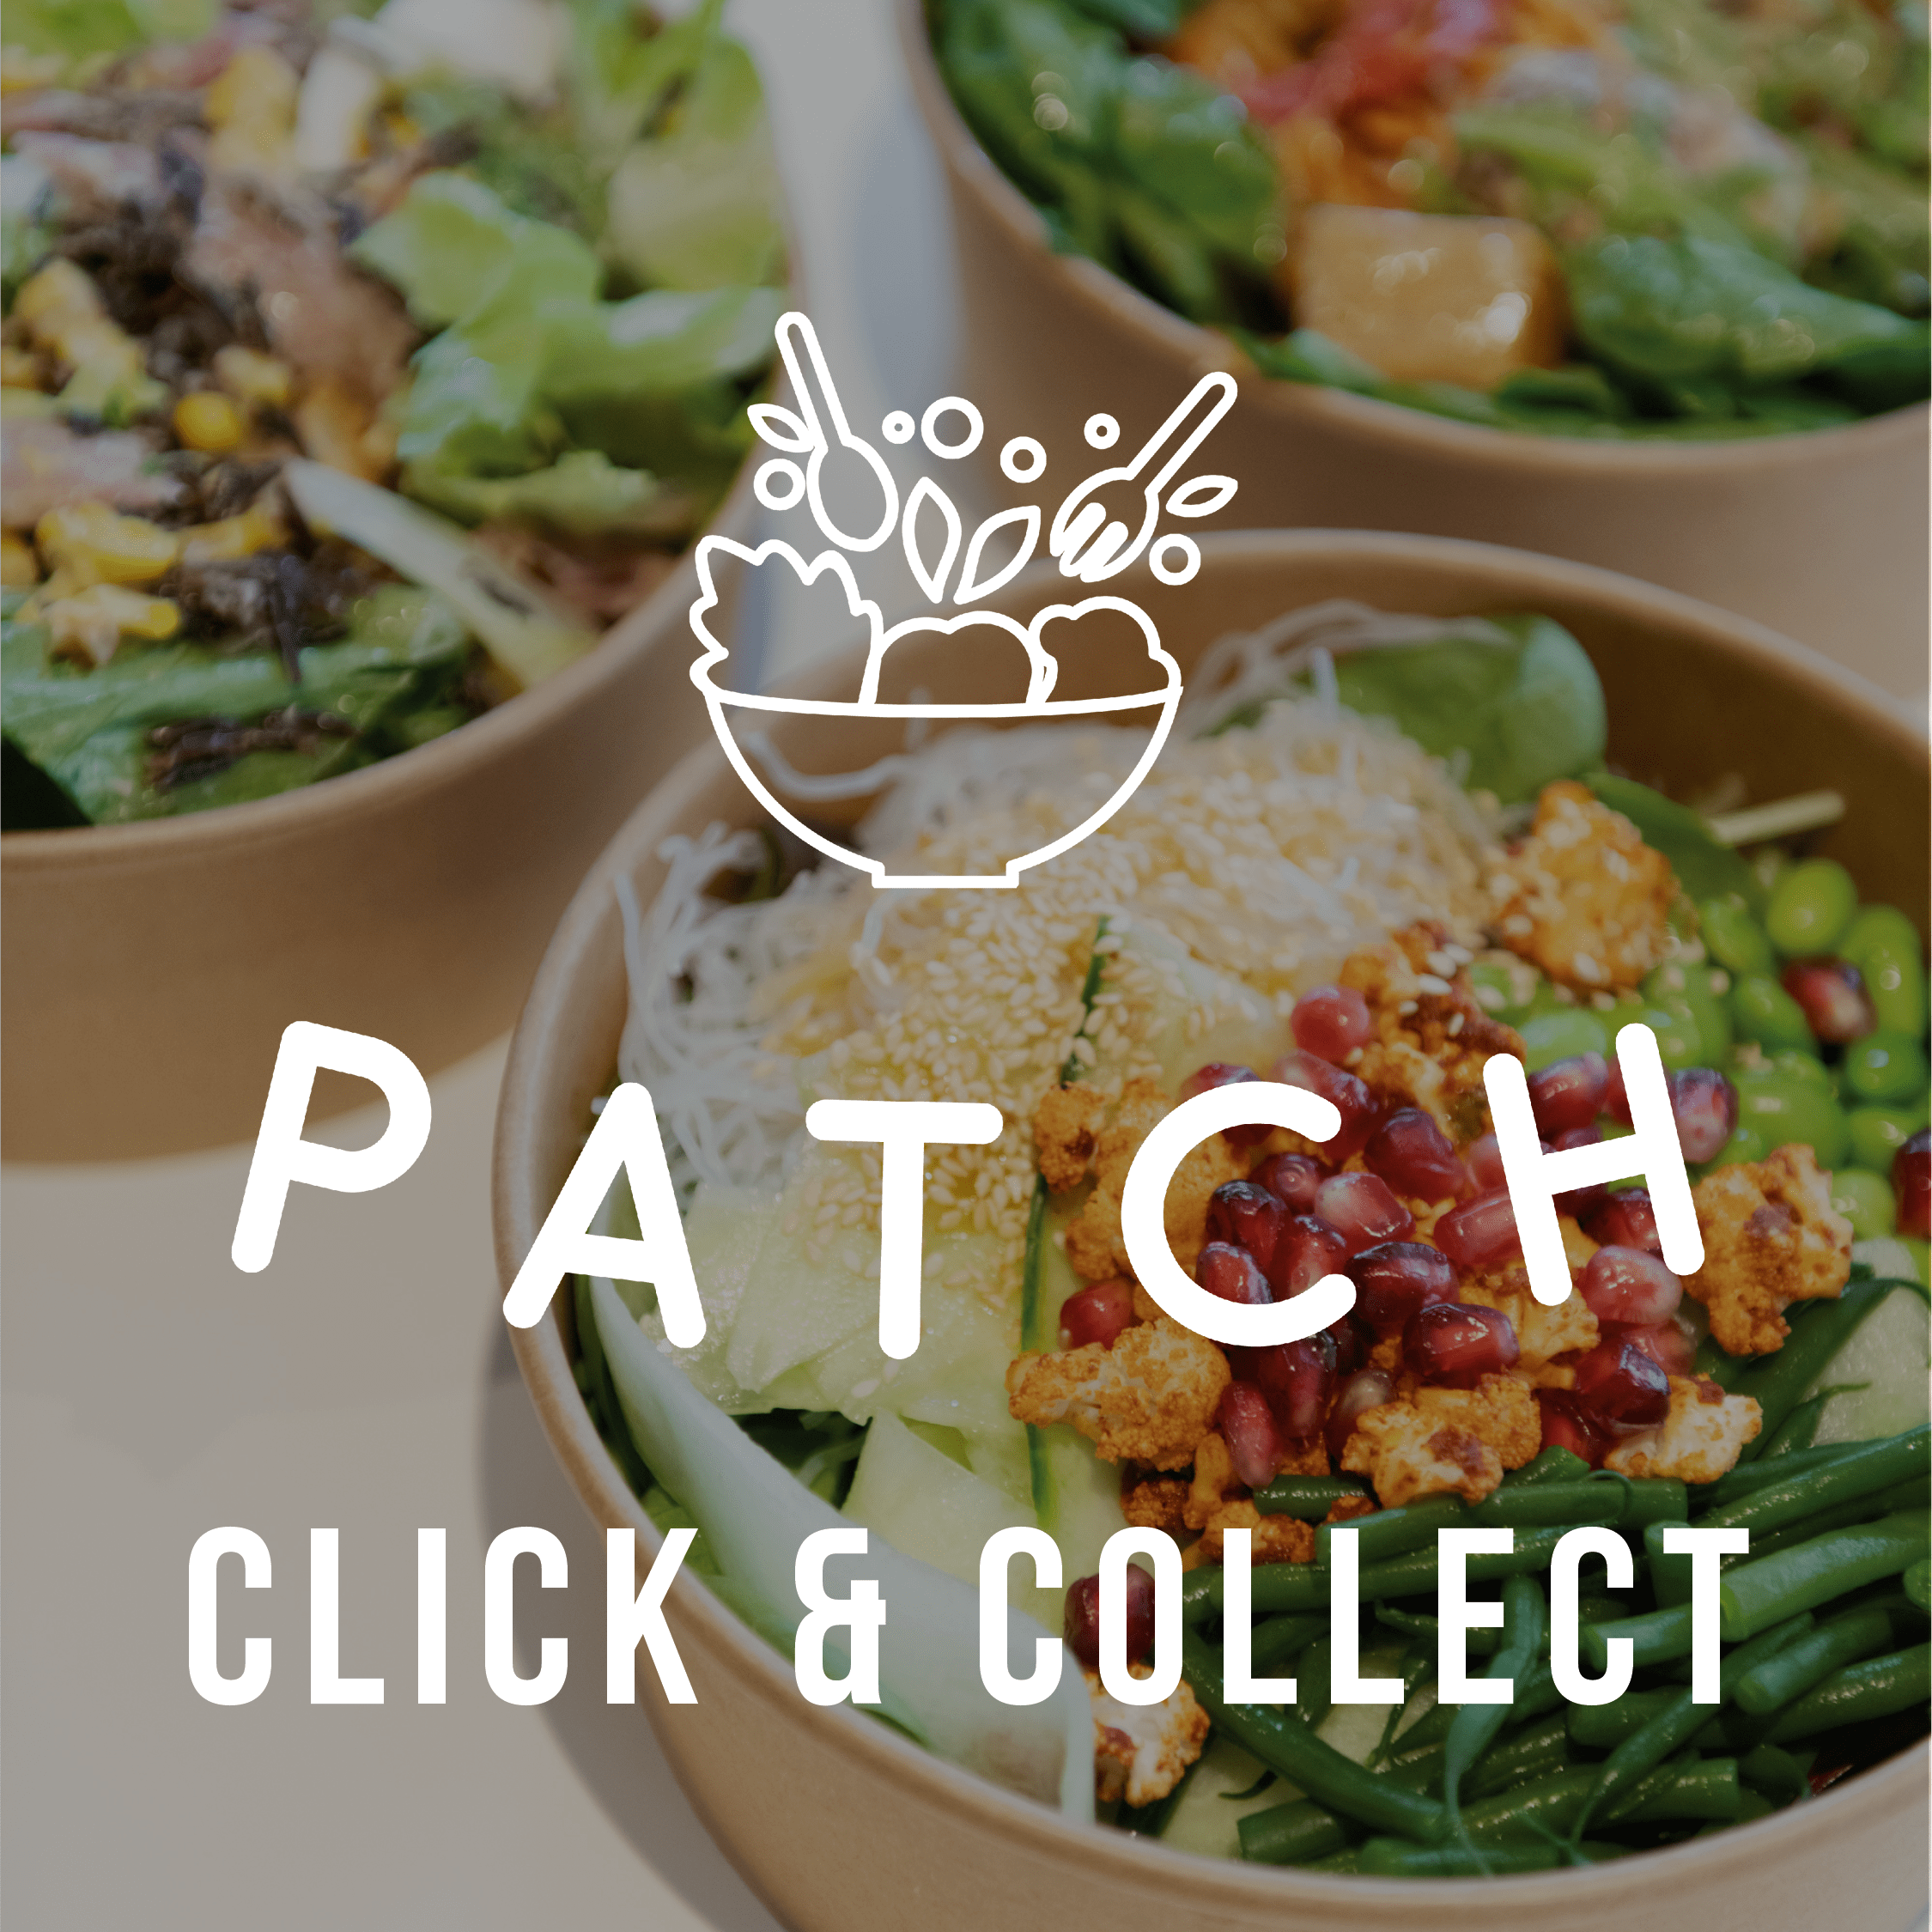 Image of salad bowl with text saying "Patch Click & Collect"